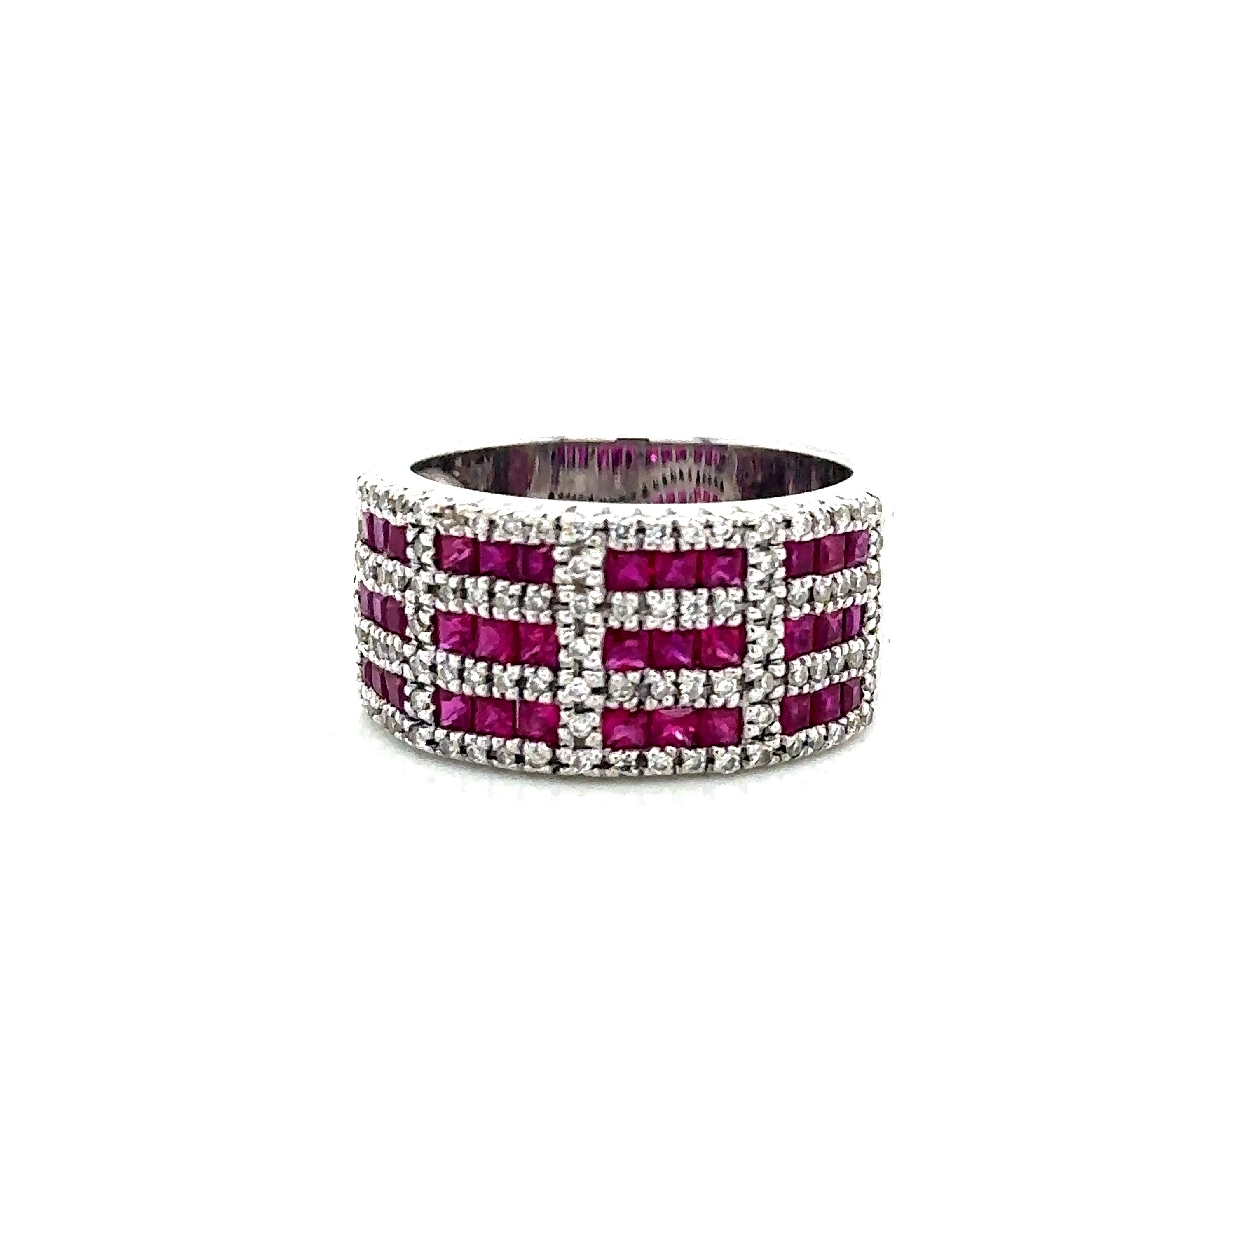 18K White Gold Levian Diamond and Ruby Ring

Size 6.5